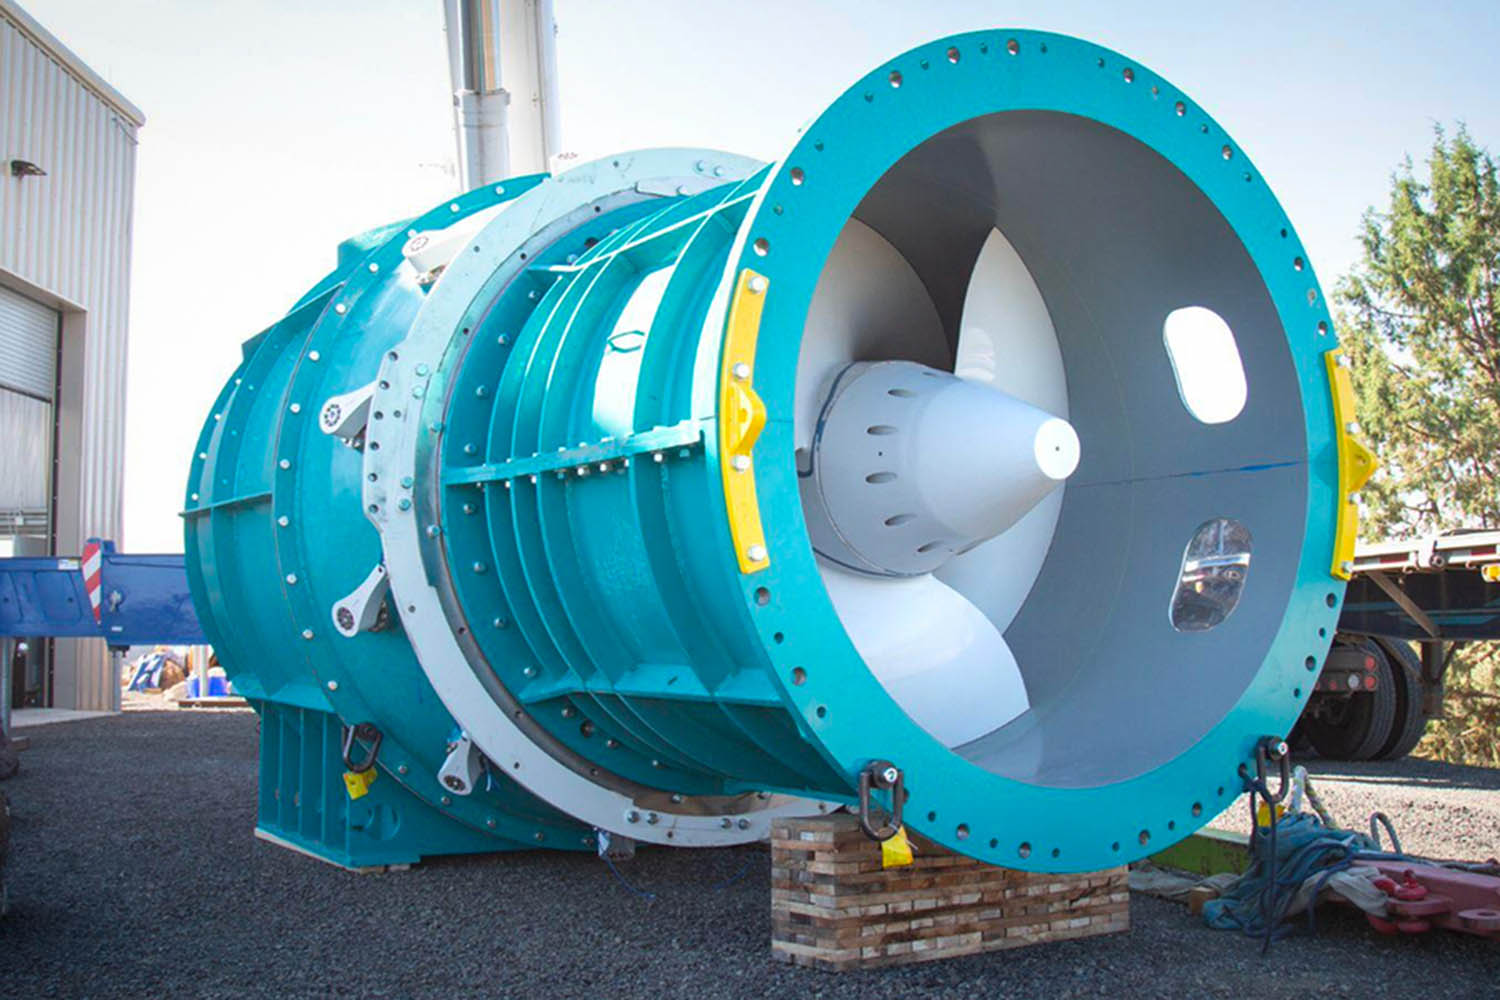 A large turbine is shown in what appears to be a parking lot. The housing is light blue, and the turbine is white. A flatbed truck just visible in the background provides a sense of scale. The turbine is many times taller than the truck.